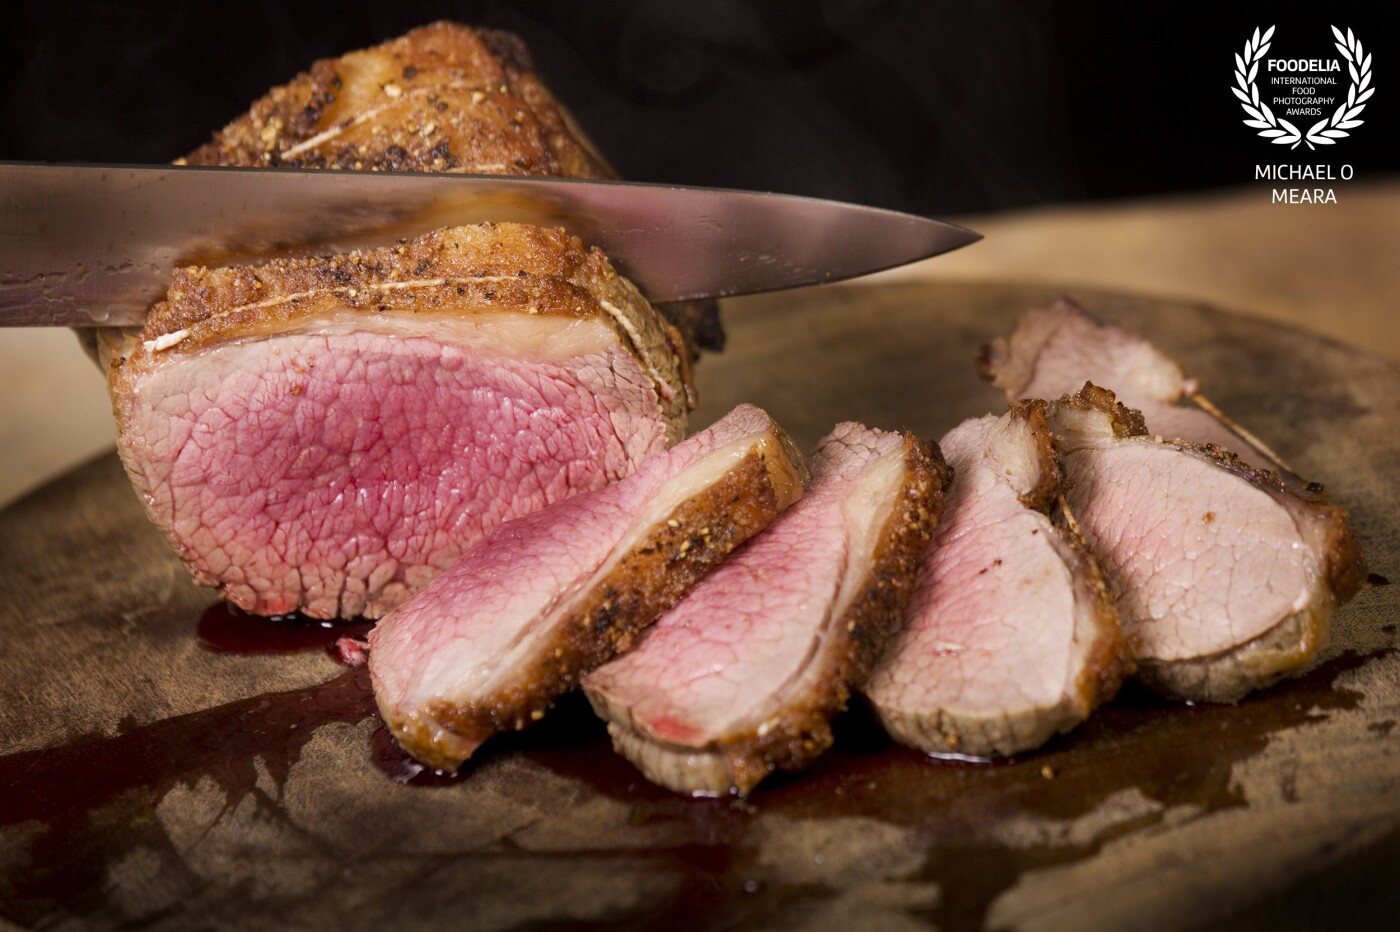 Roast topside of beef cooked medium rare is a real classic. The secret is allowing the beef to relax for at least 10-15 minutes before carving and shooting the picture just as the beef is cut to capture the succulent juices. 